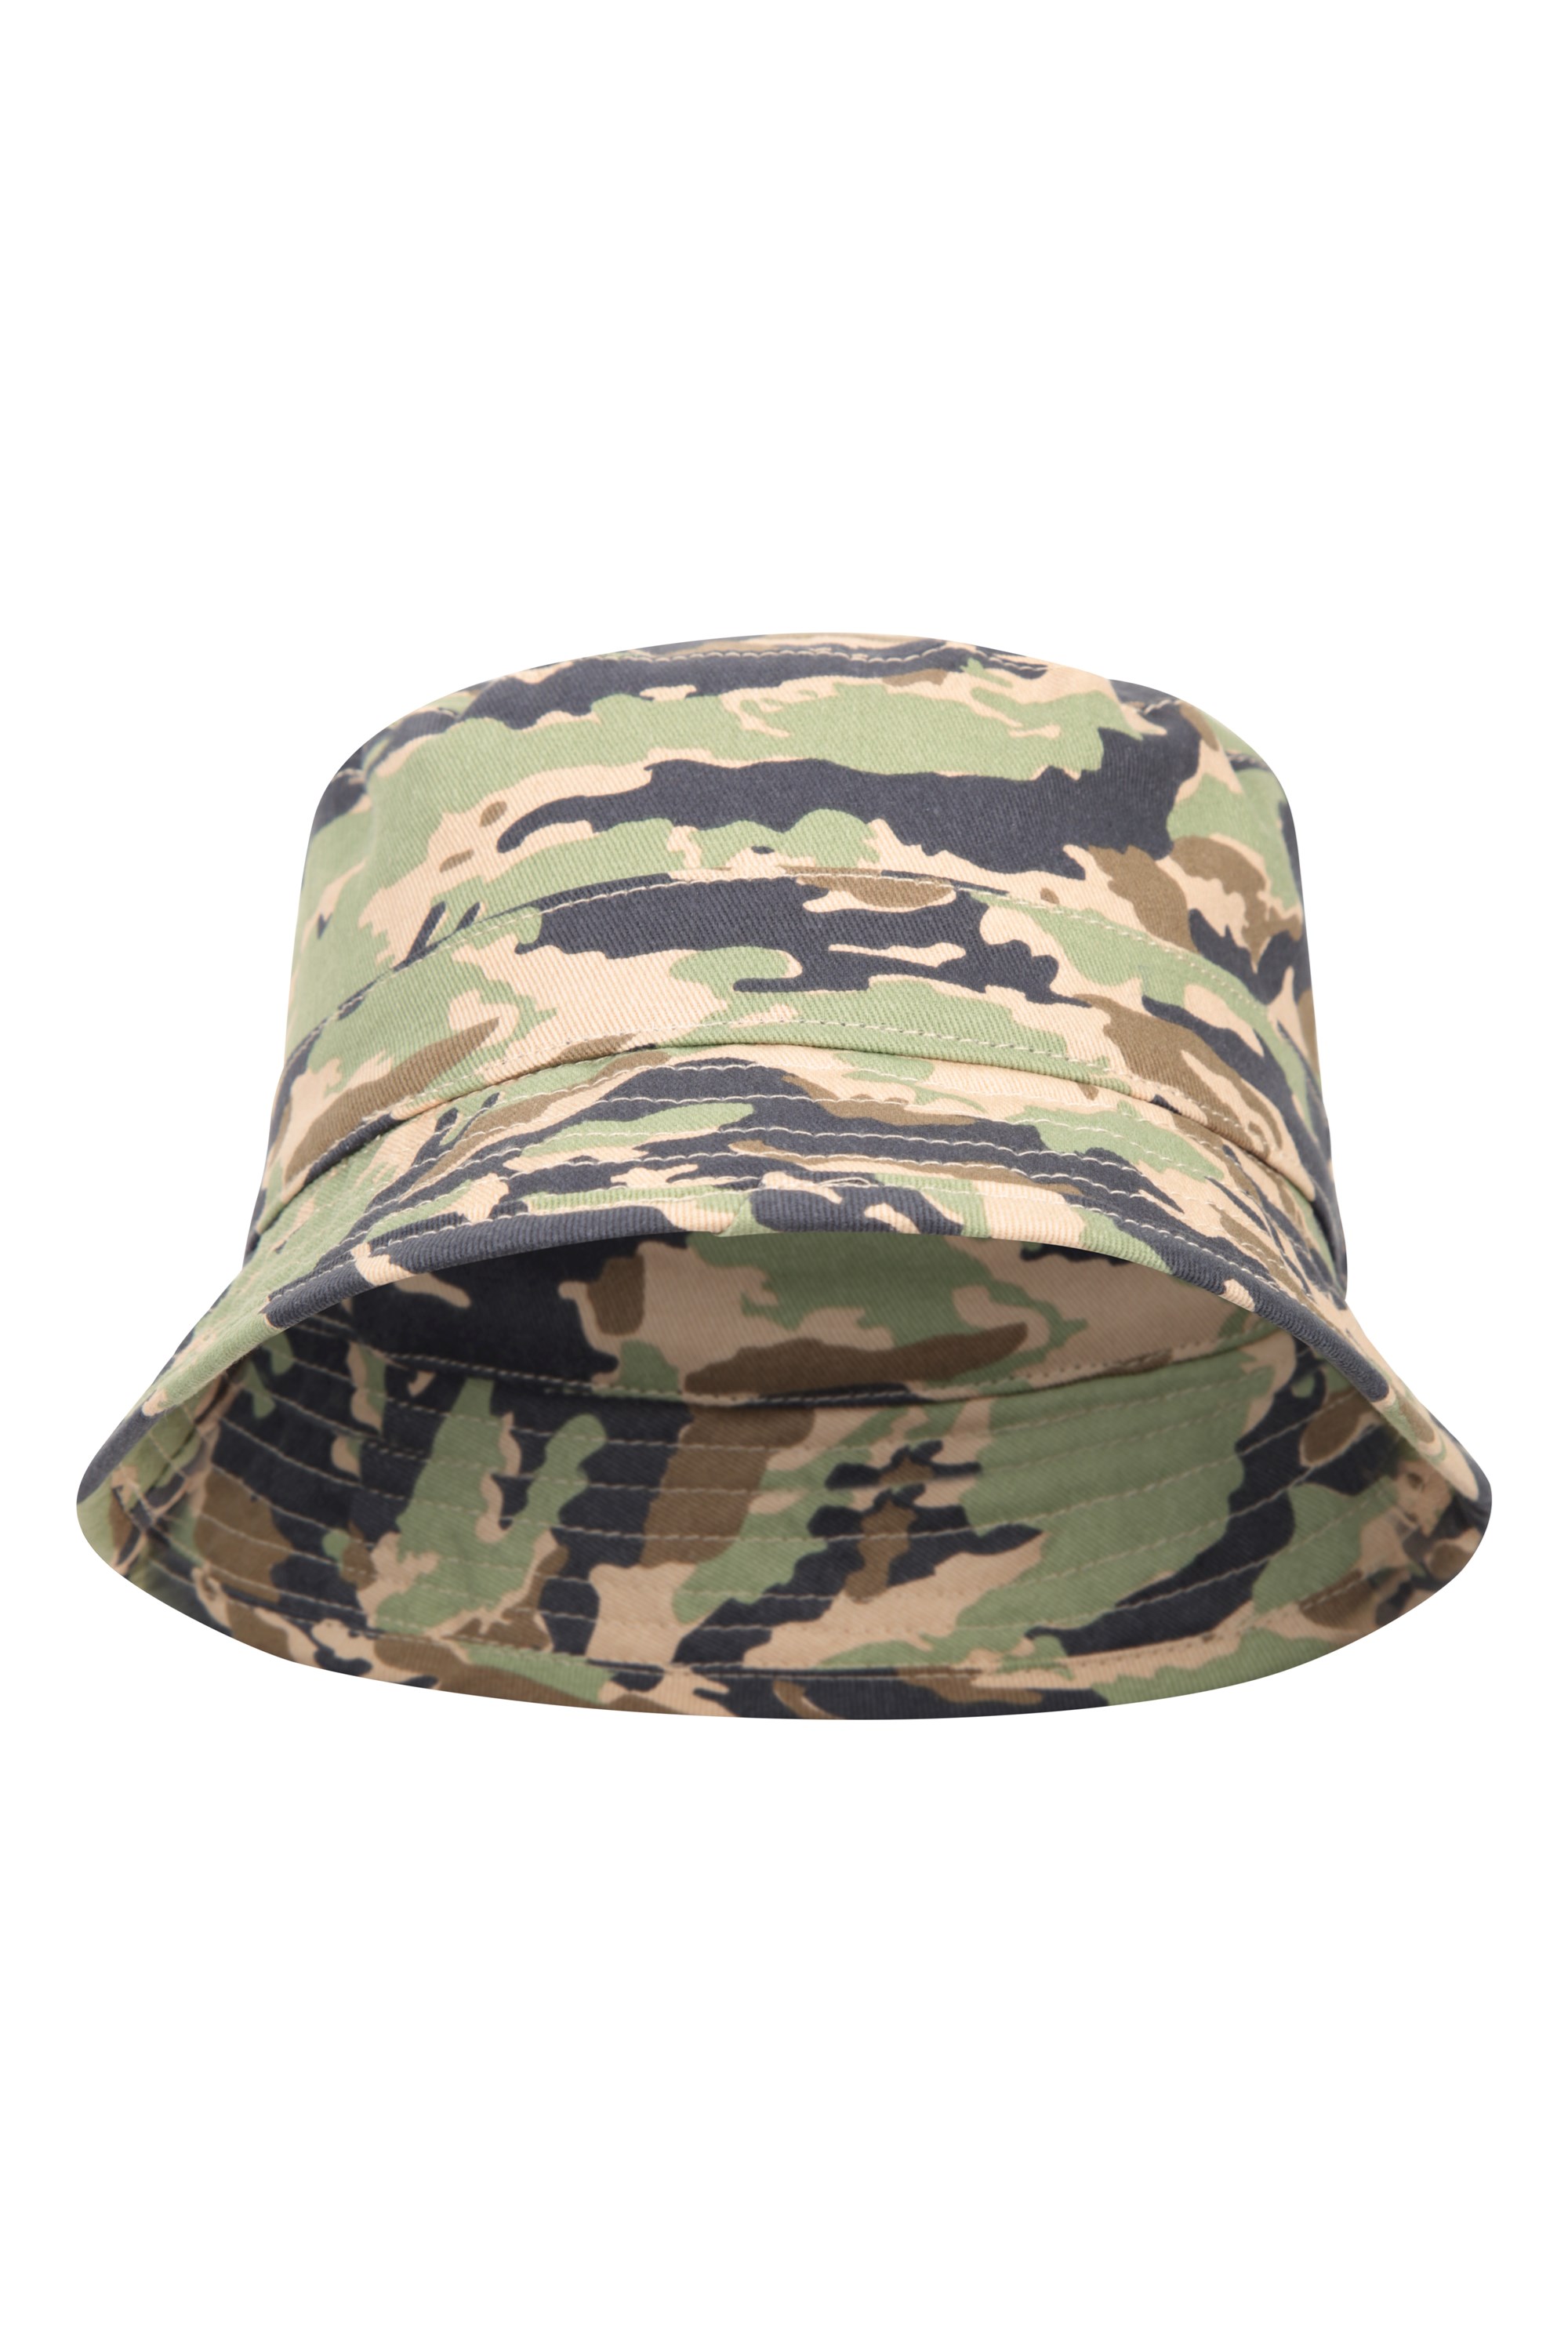 Kids Boys Camouflage-Sun-Hat Outdoor Bucket-Boys Fishman-Hat Cap Packable  Fit for 2-3 Years